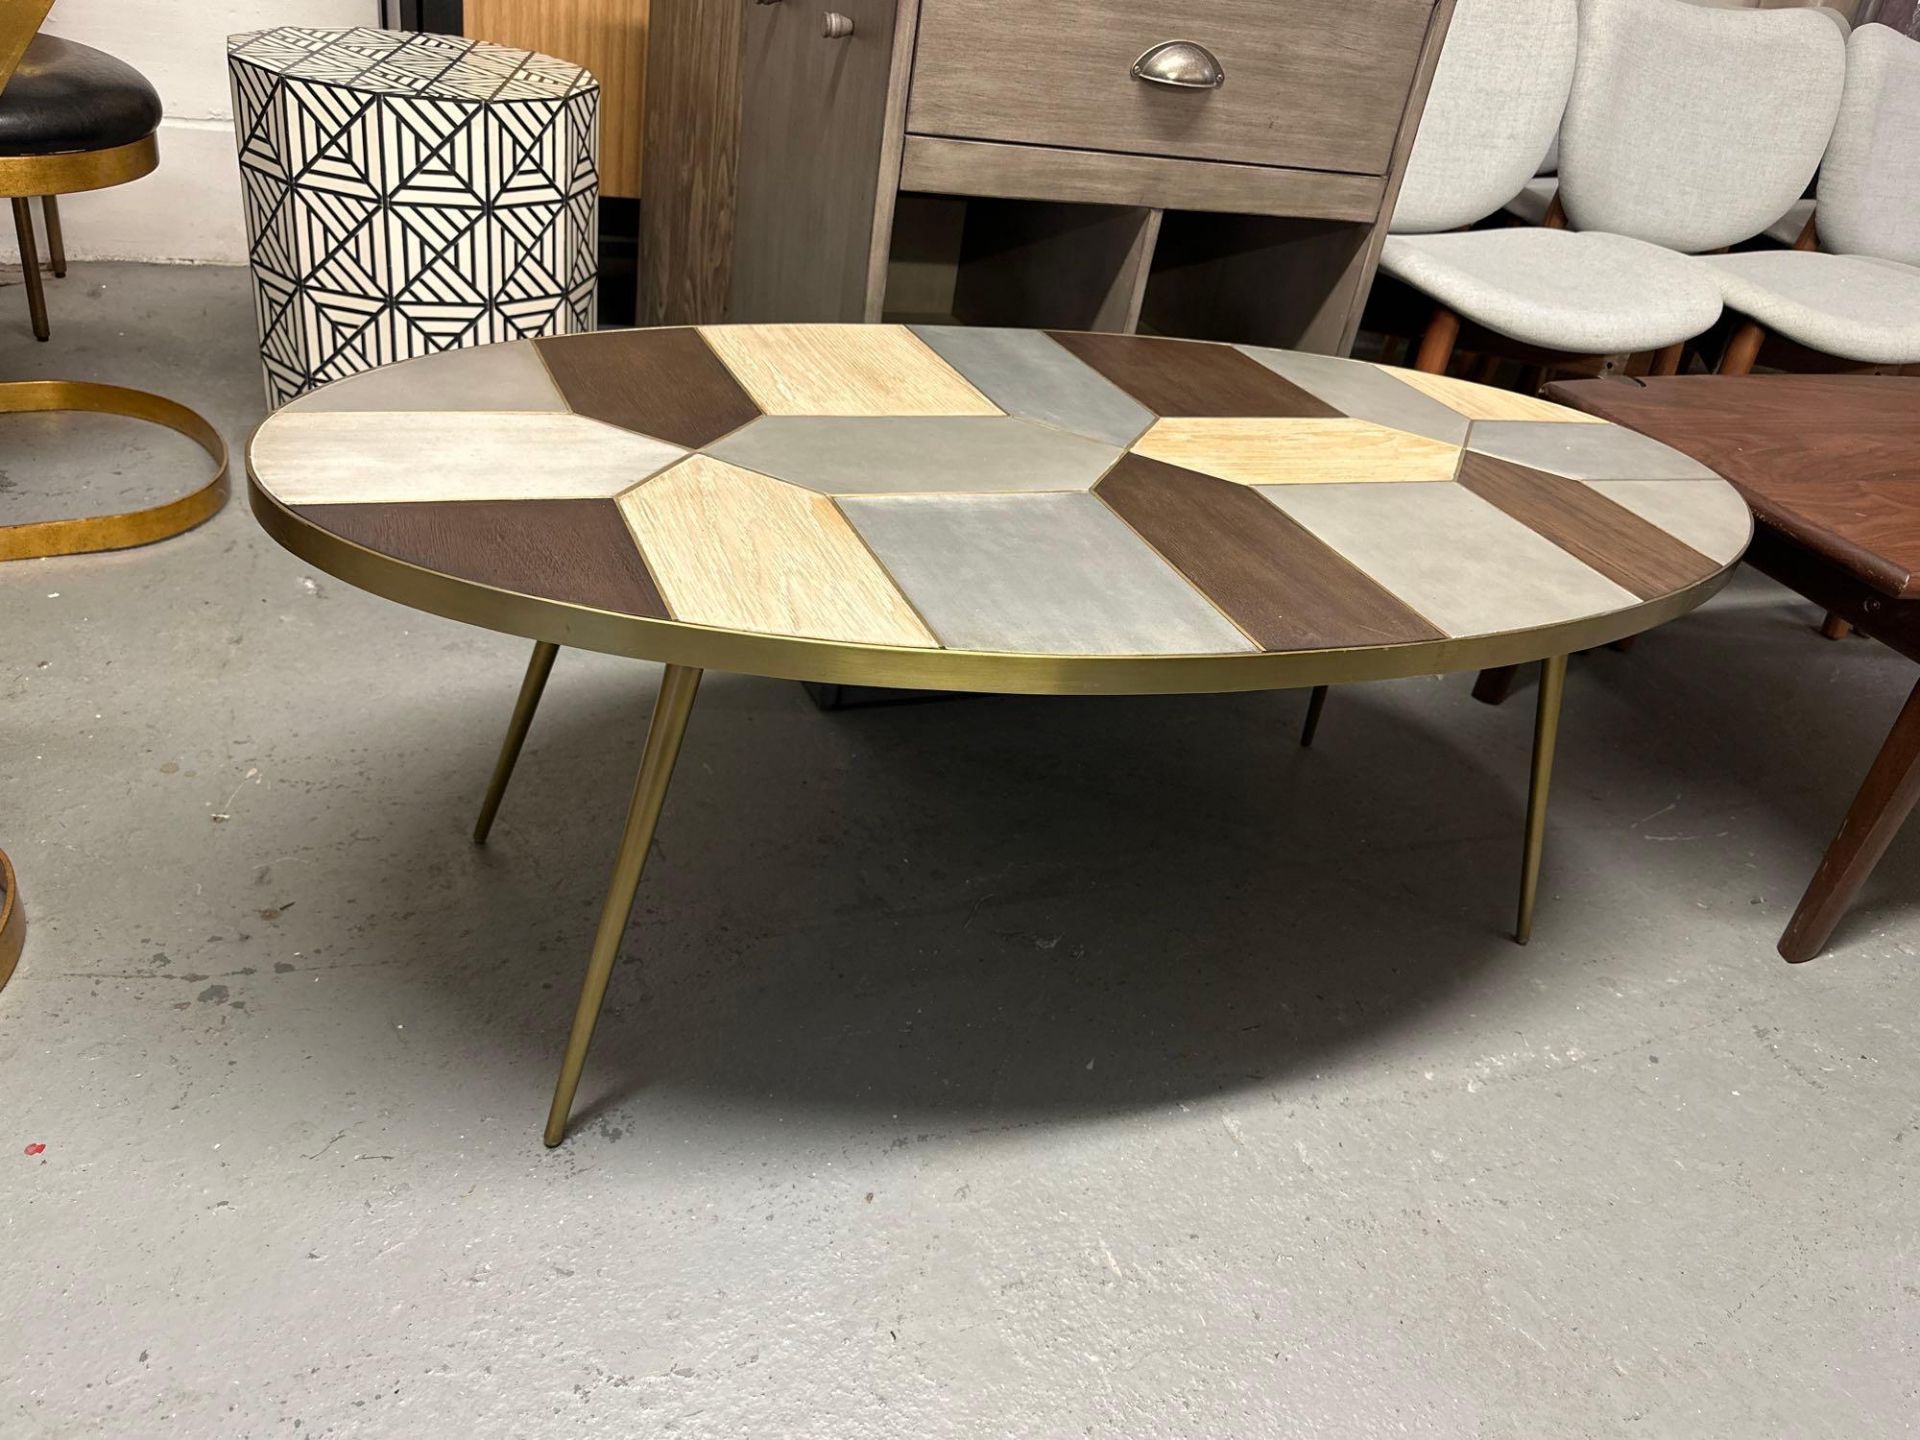 Christiane Lemieux Modus Coffee Table A wood & metal inlaid top coffee table on brass legs - Image 2 of 4